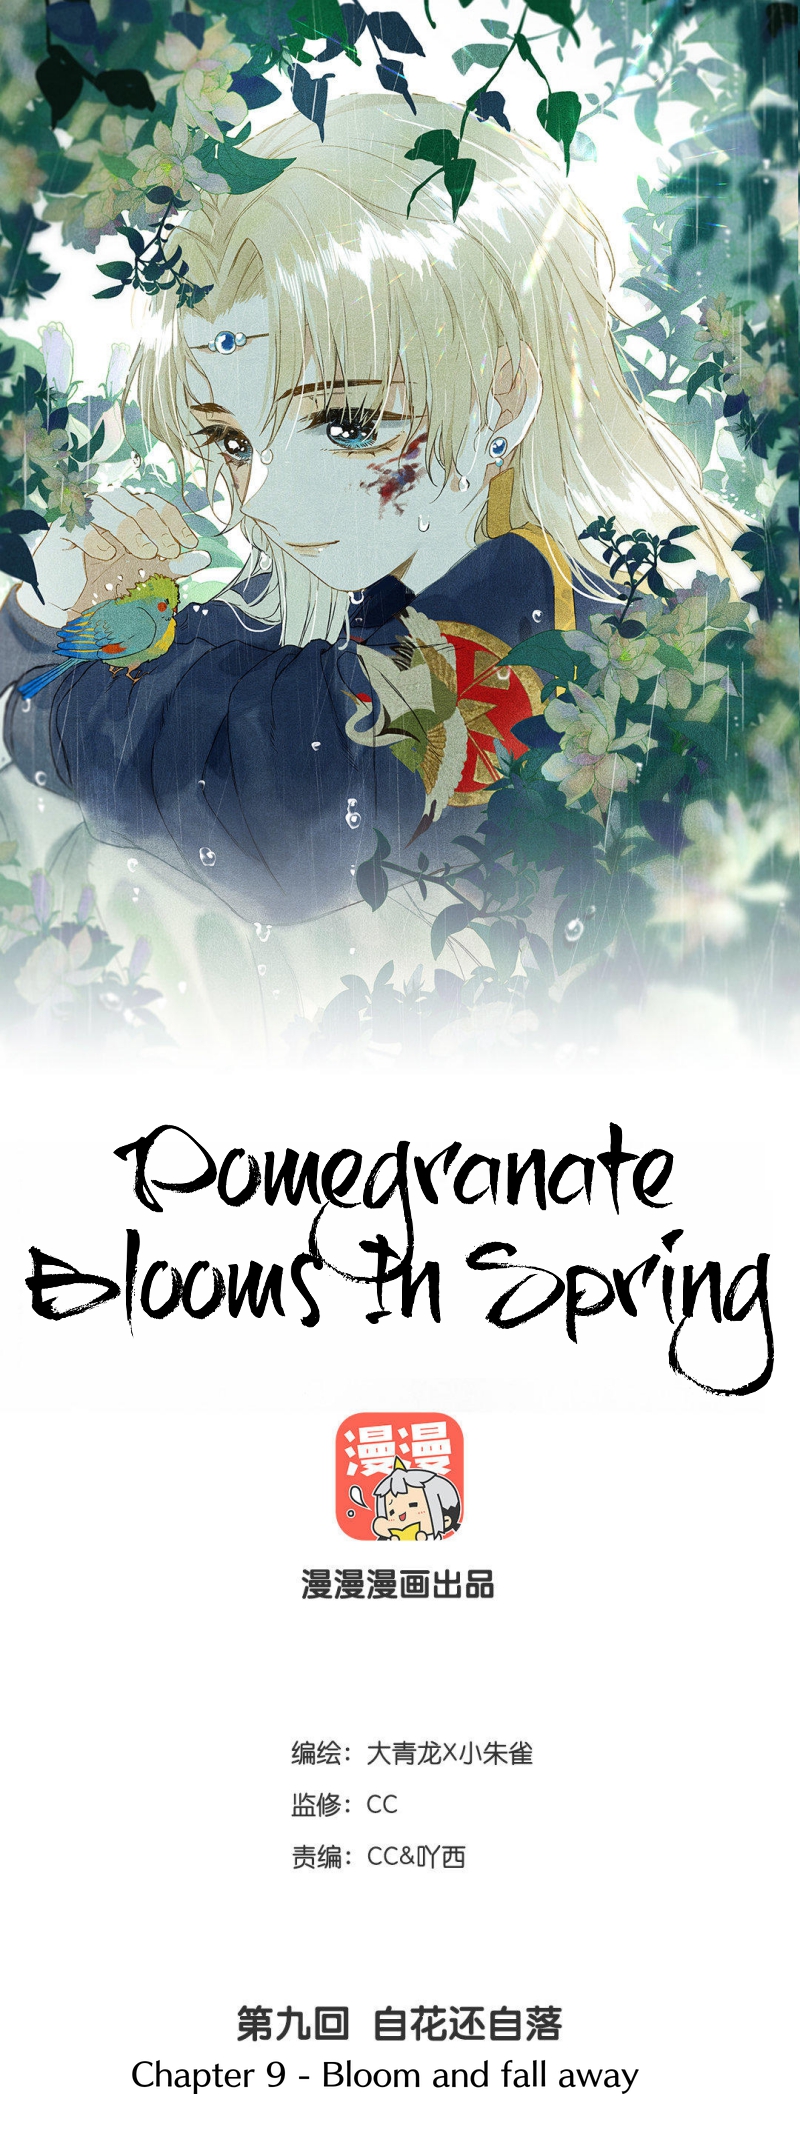 Pomegranate Blooms in Spring Ch. 9 Bloom and fall away